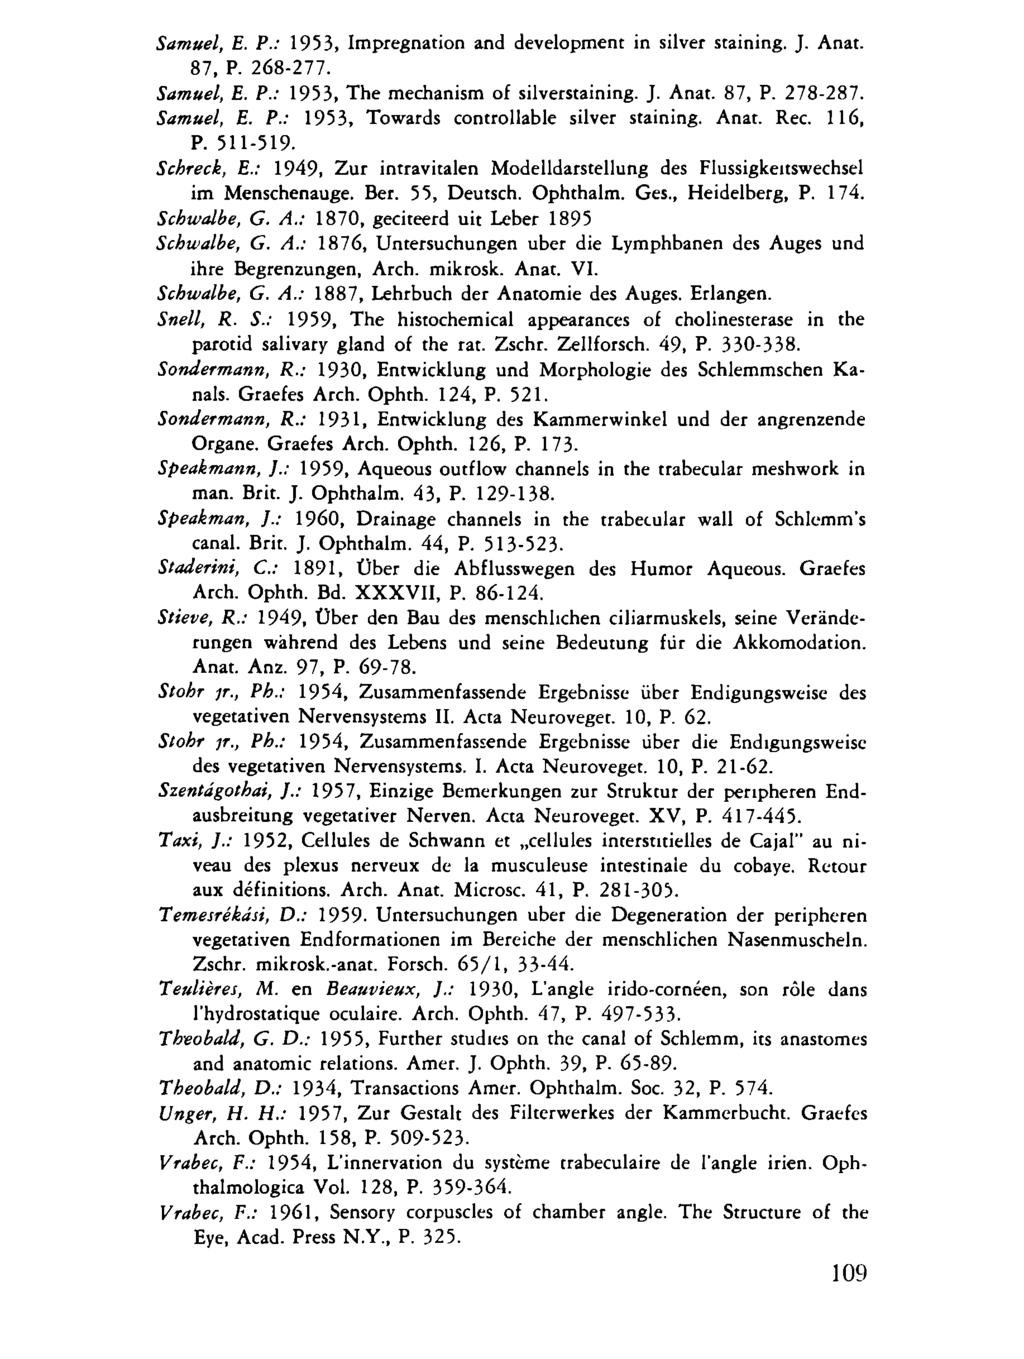 Samuel, E. P.: 1953, Impregnation and development in silver staining. J. Anat. 87, P. 268-277. Samuel, E. P.: 1953, The mechanism of silverstaining. J. Anat. 87, P. 278-287. Samuel, E. P.: 1953, Towards controllable silver staining.